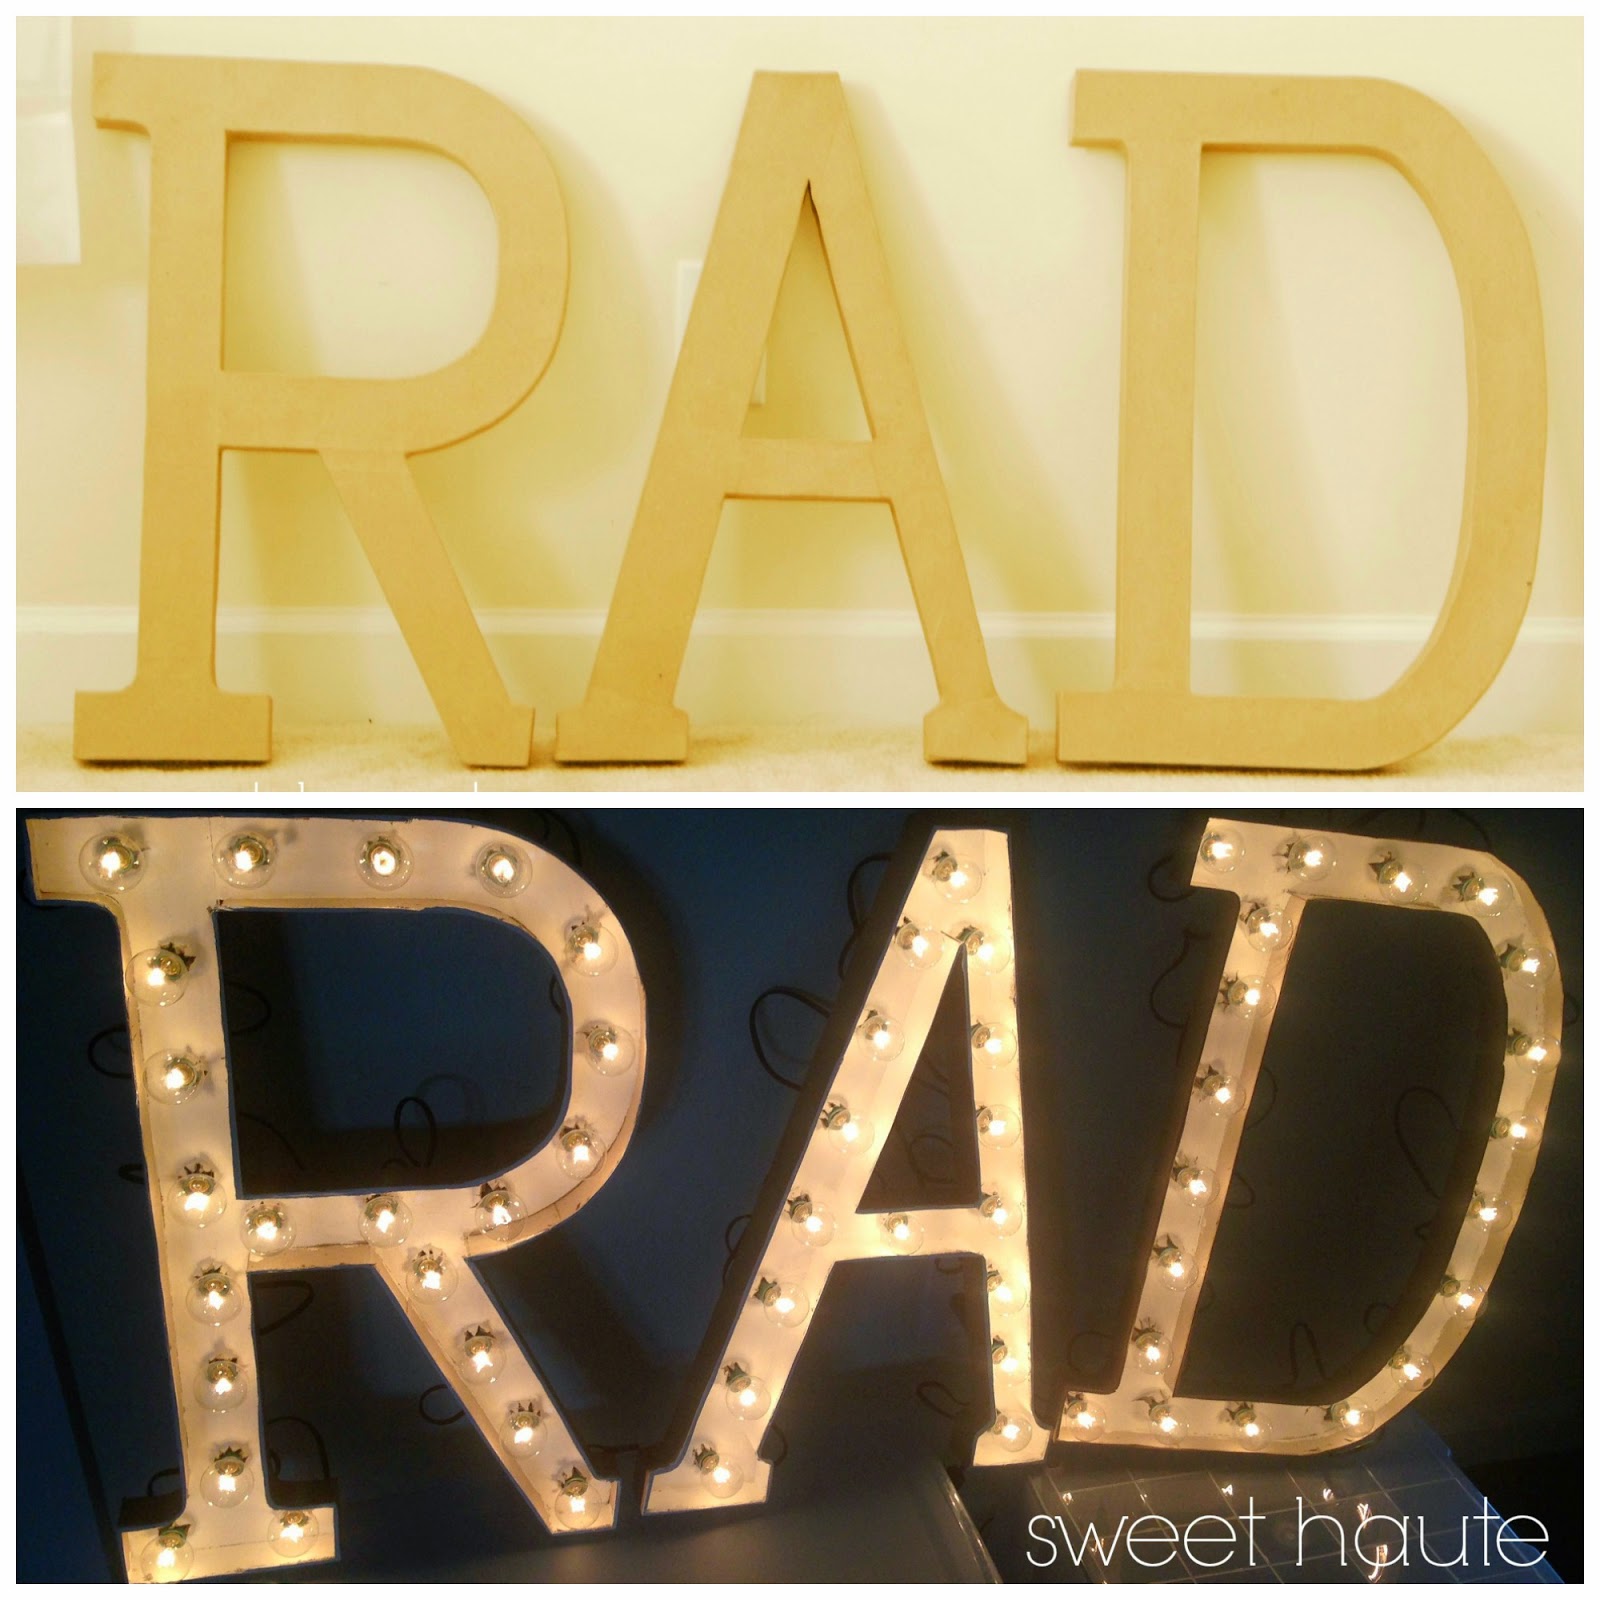 http://sweethaute.blogspot.com/2014/05/rad-marquee-letters-tutorial.html